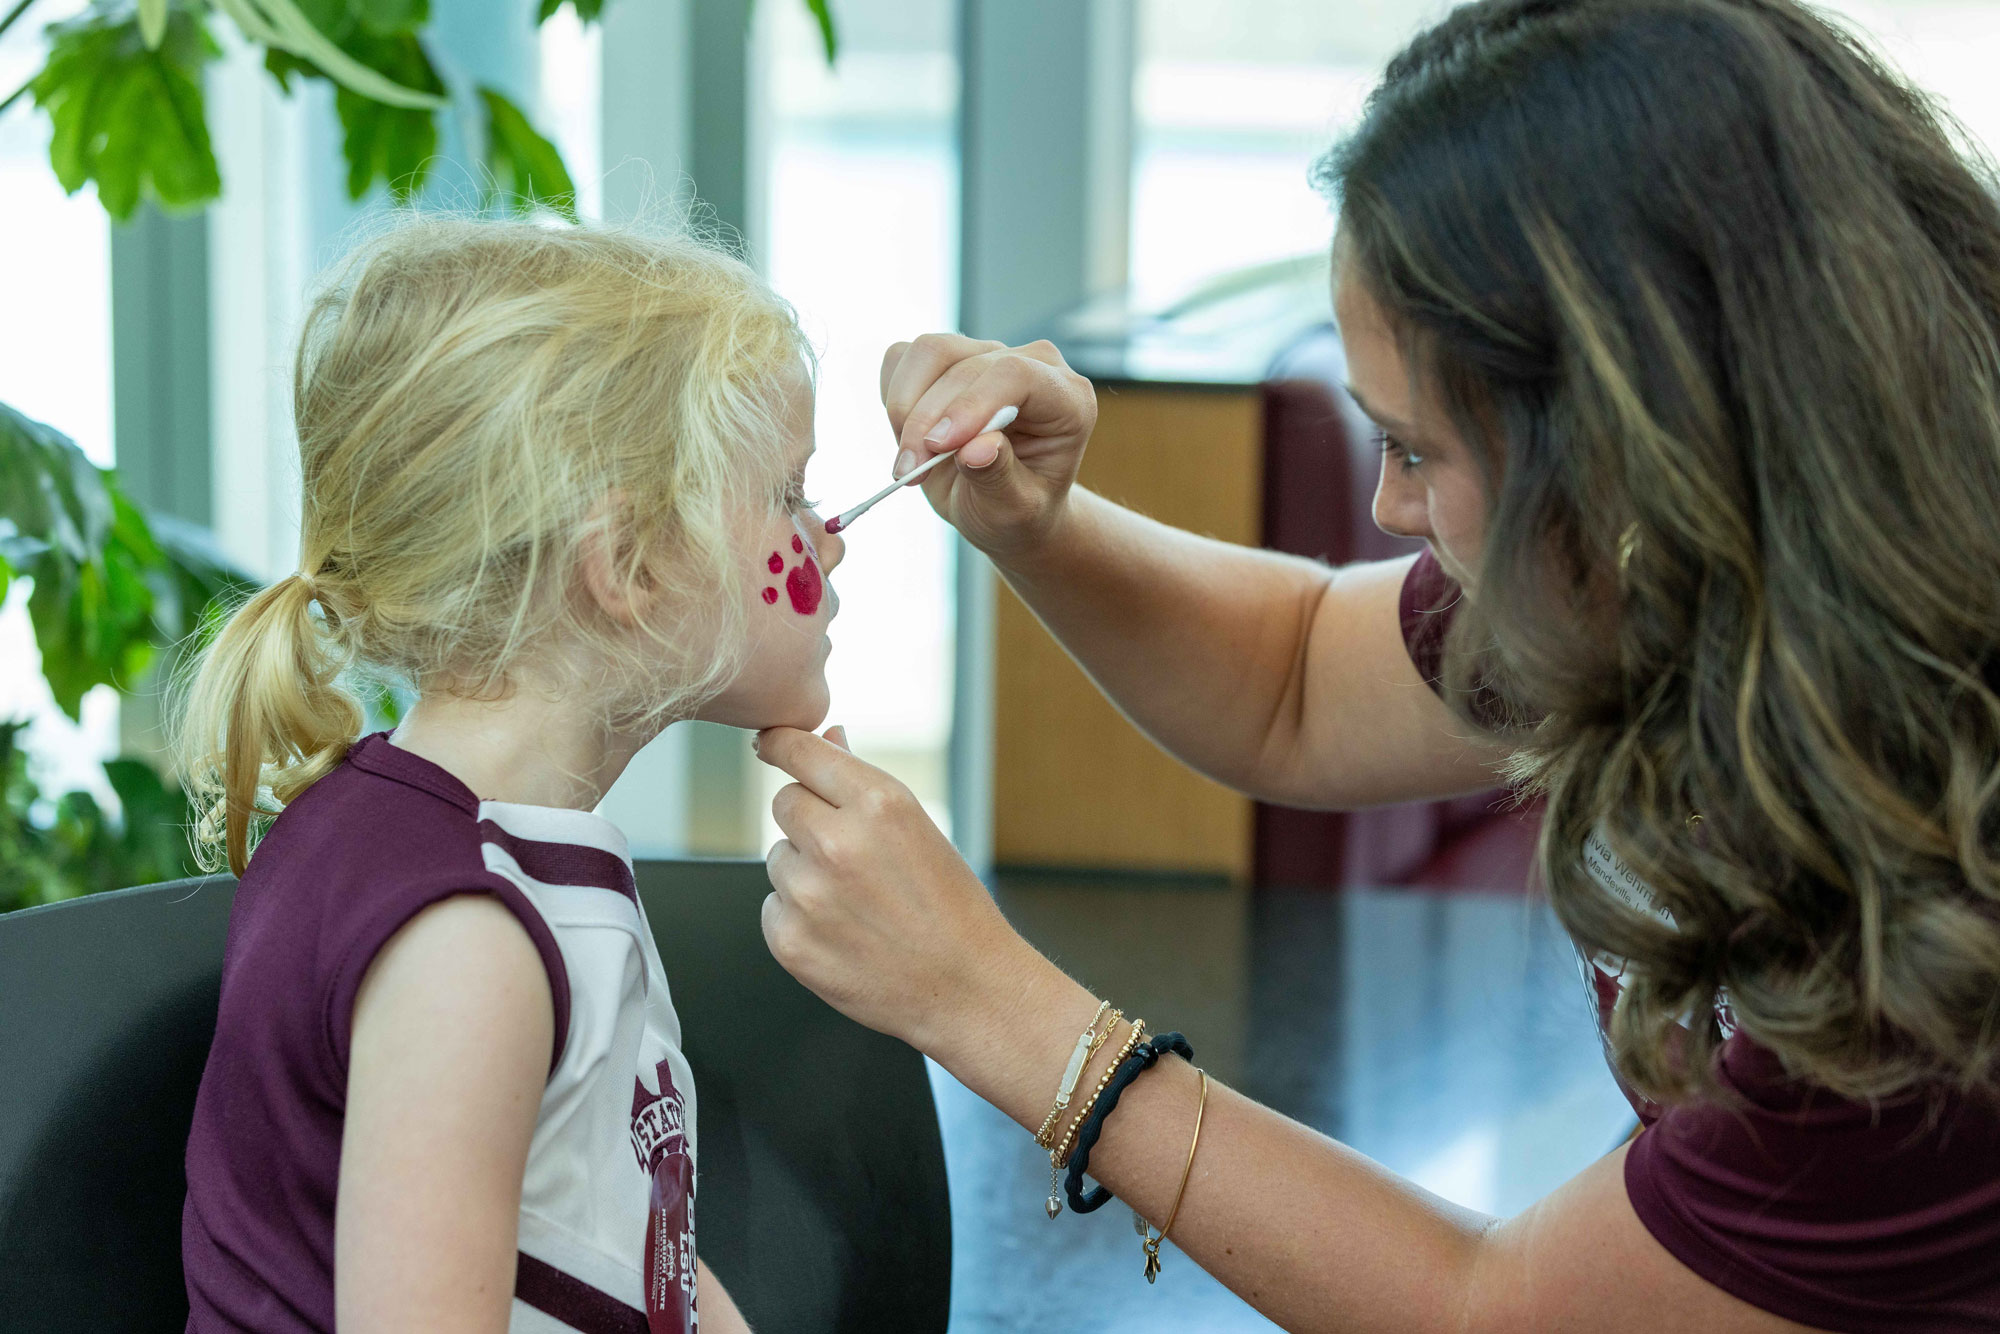 A girl is getting her face painted by a woman in a maroon shirt.